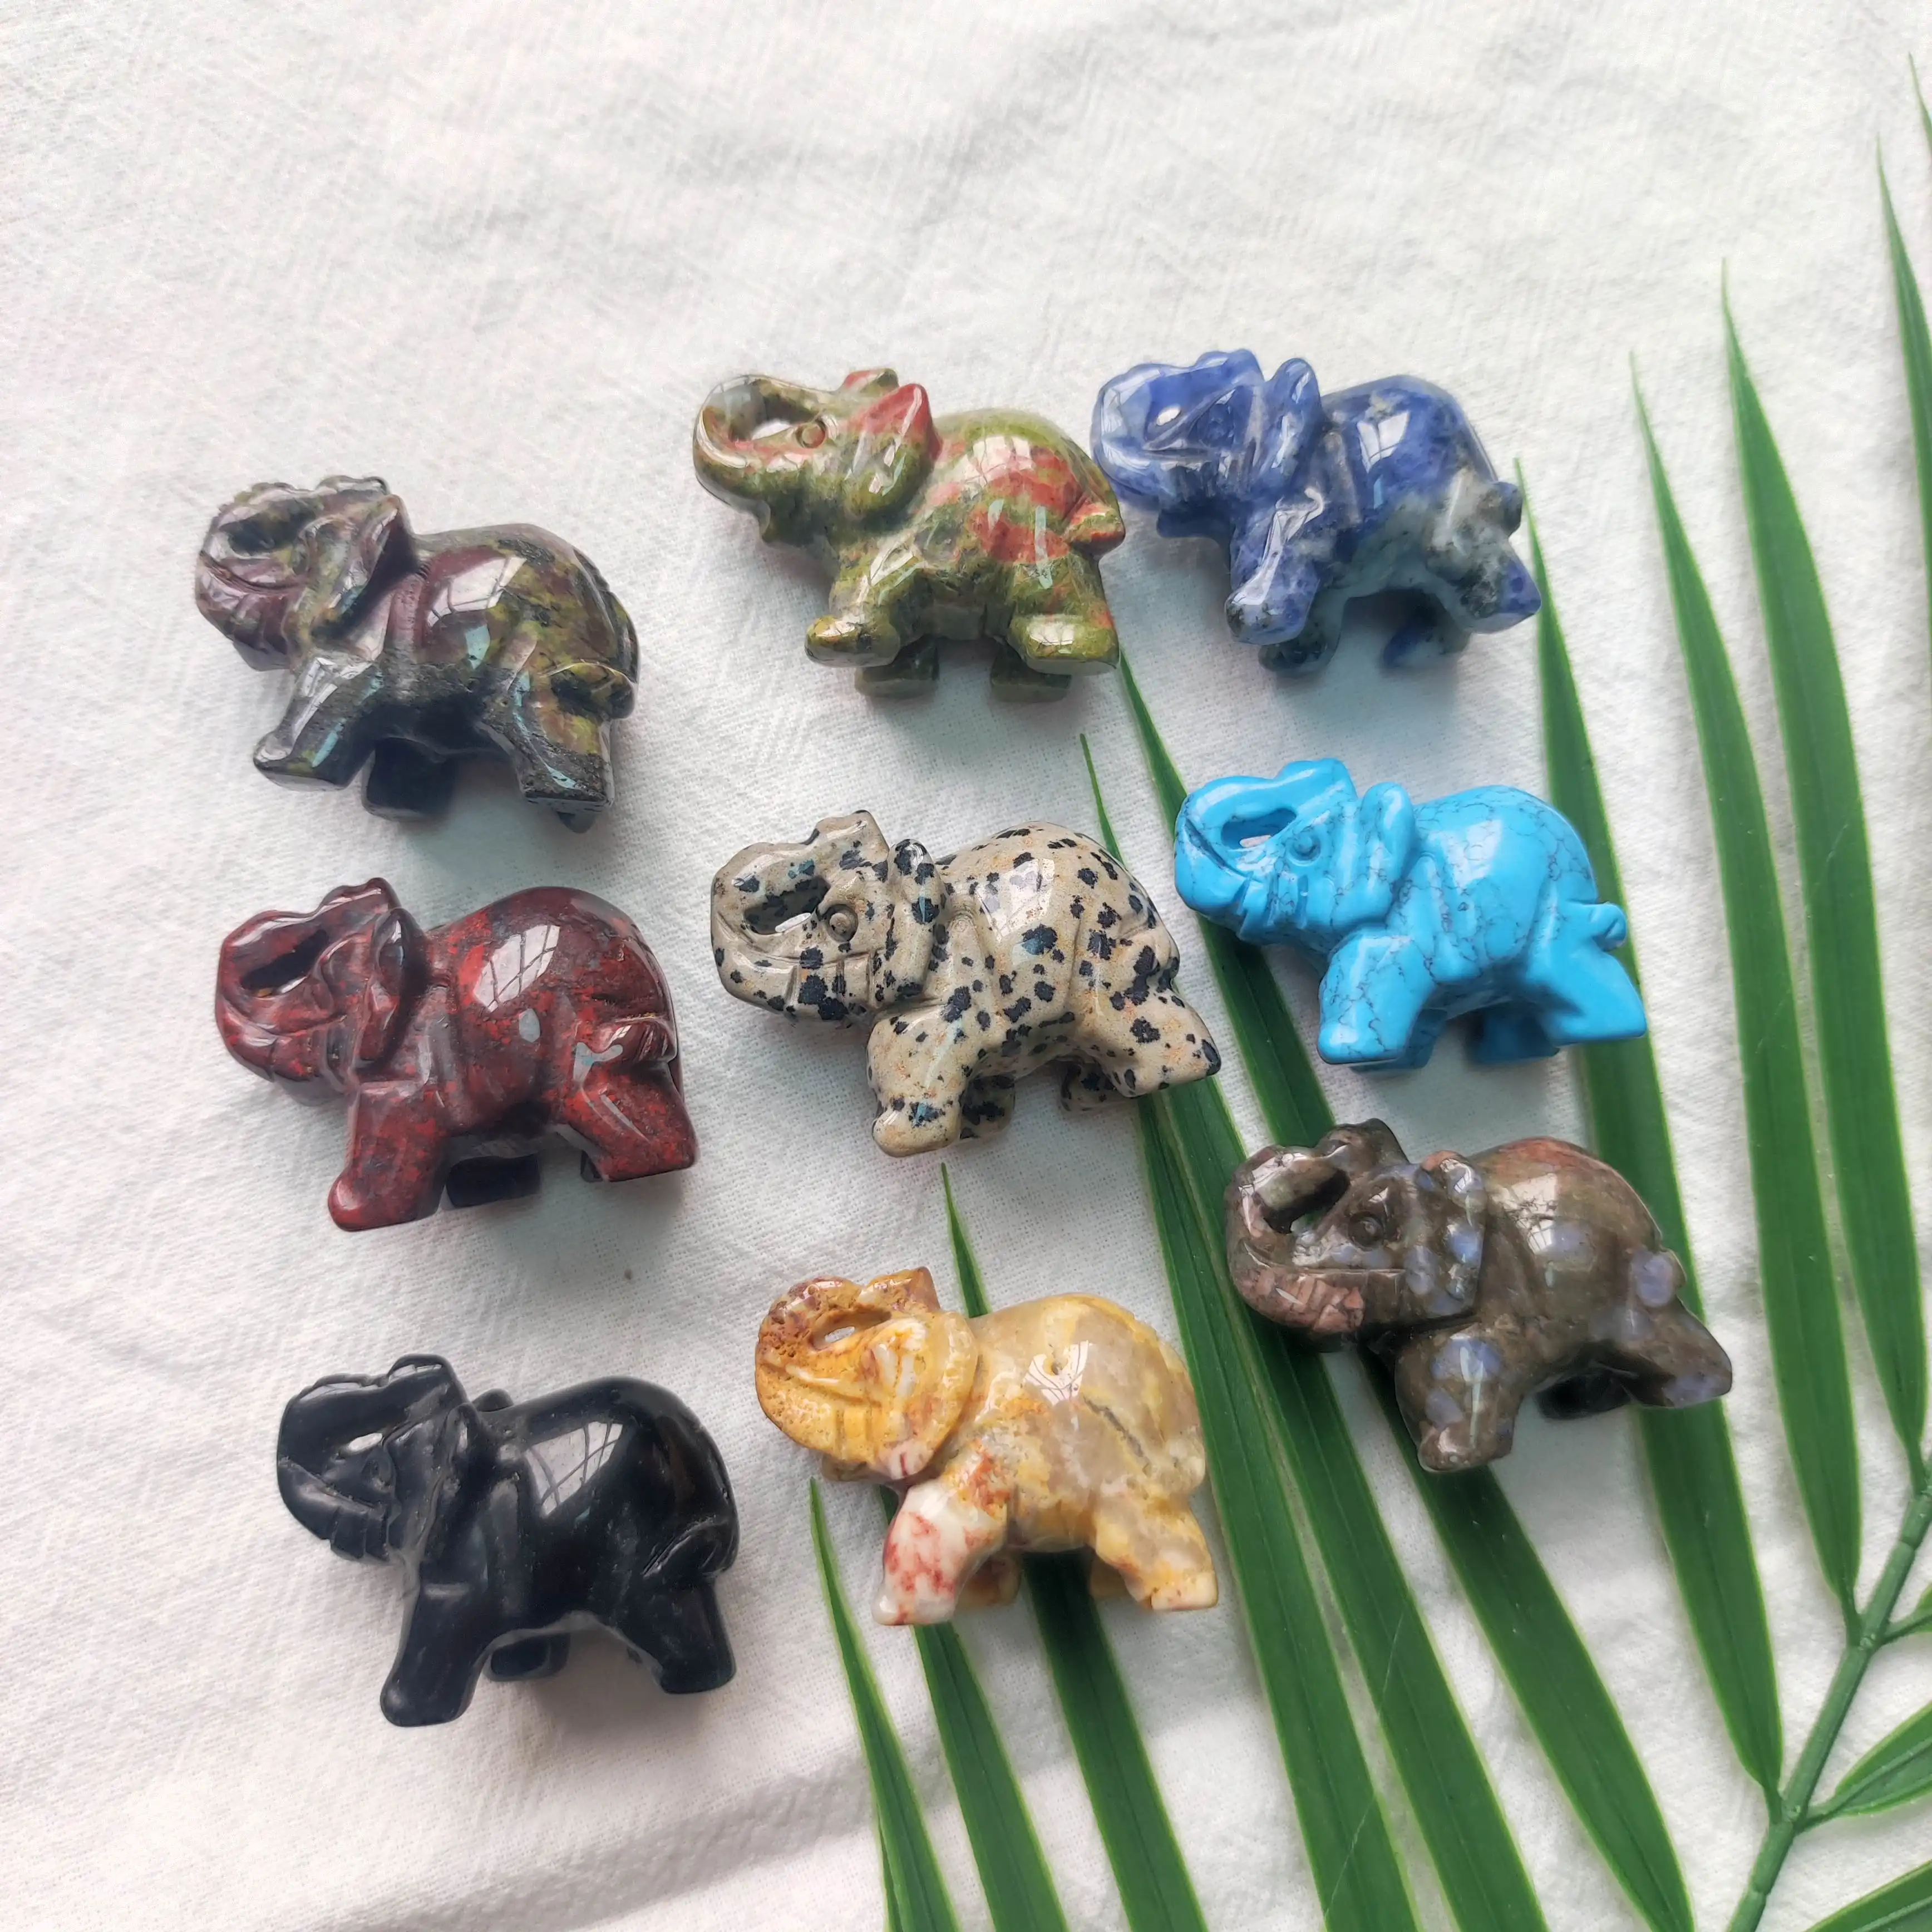 Wholesale Natural Handmade Crystal Carving Engraving Stone Animal Carvings Crystal Elephant 2 Inches